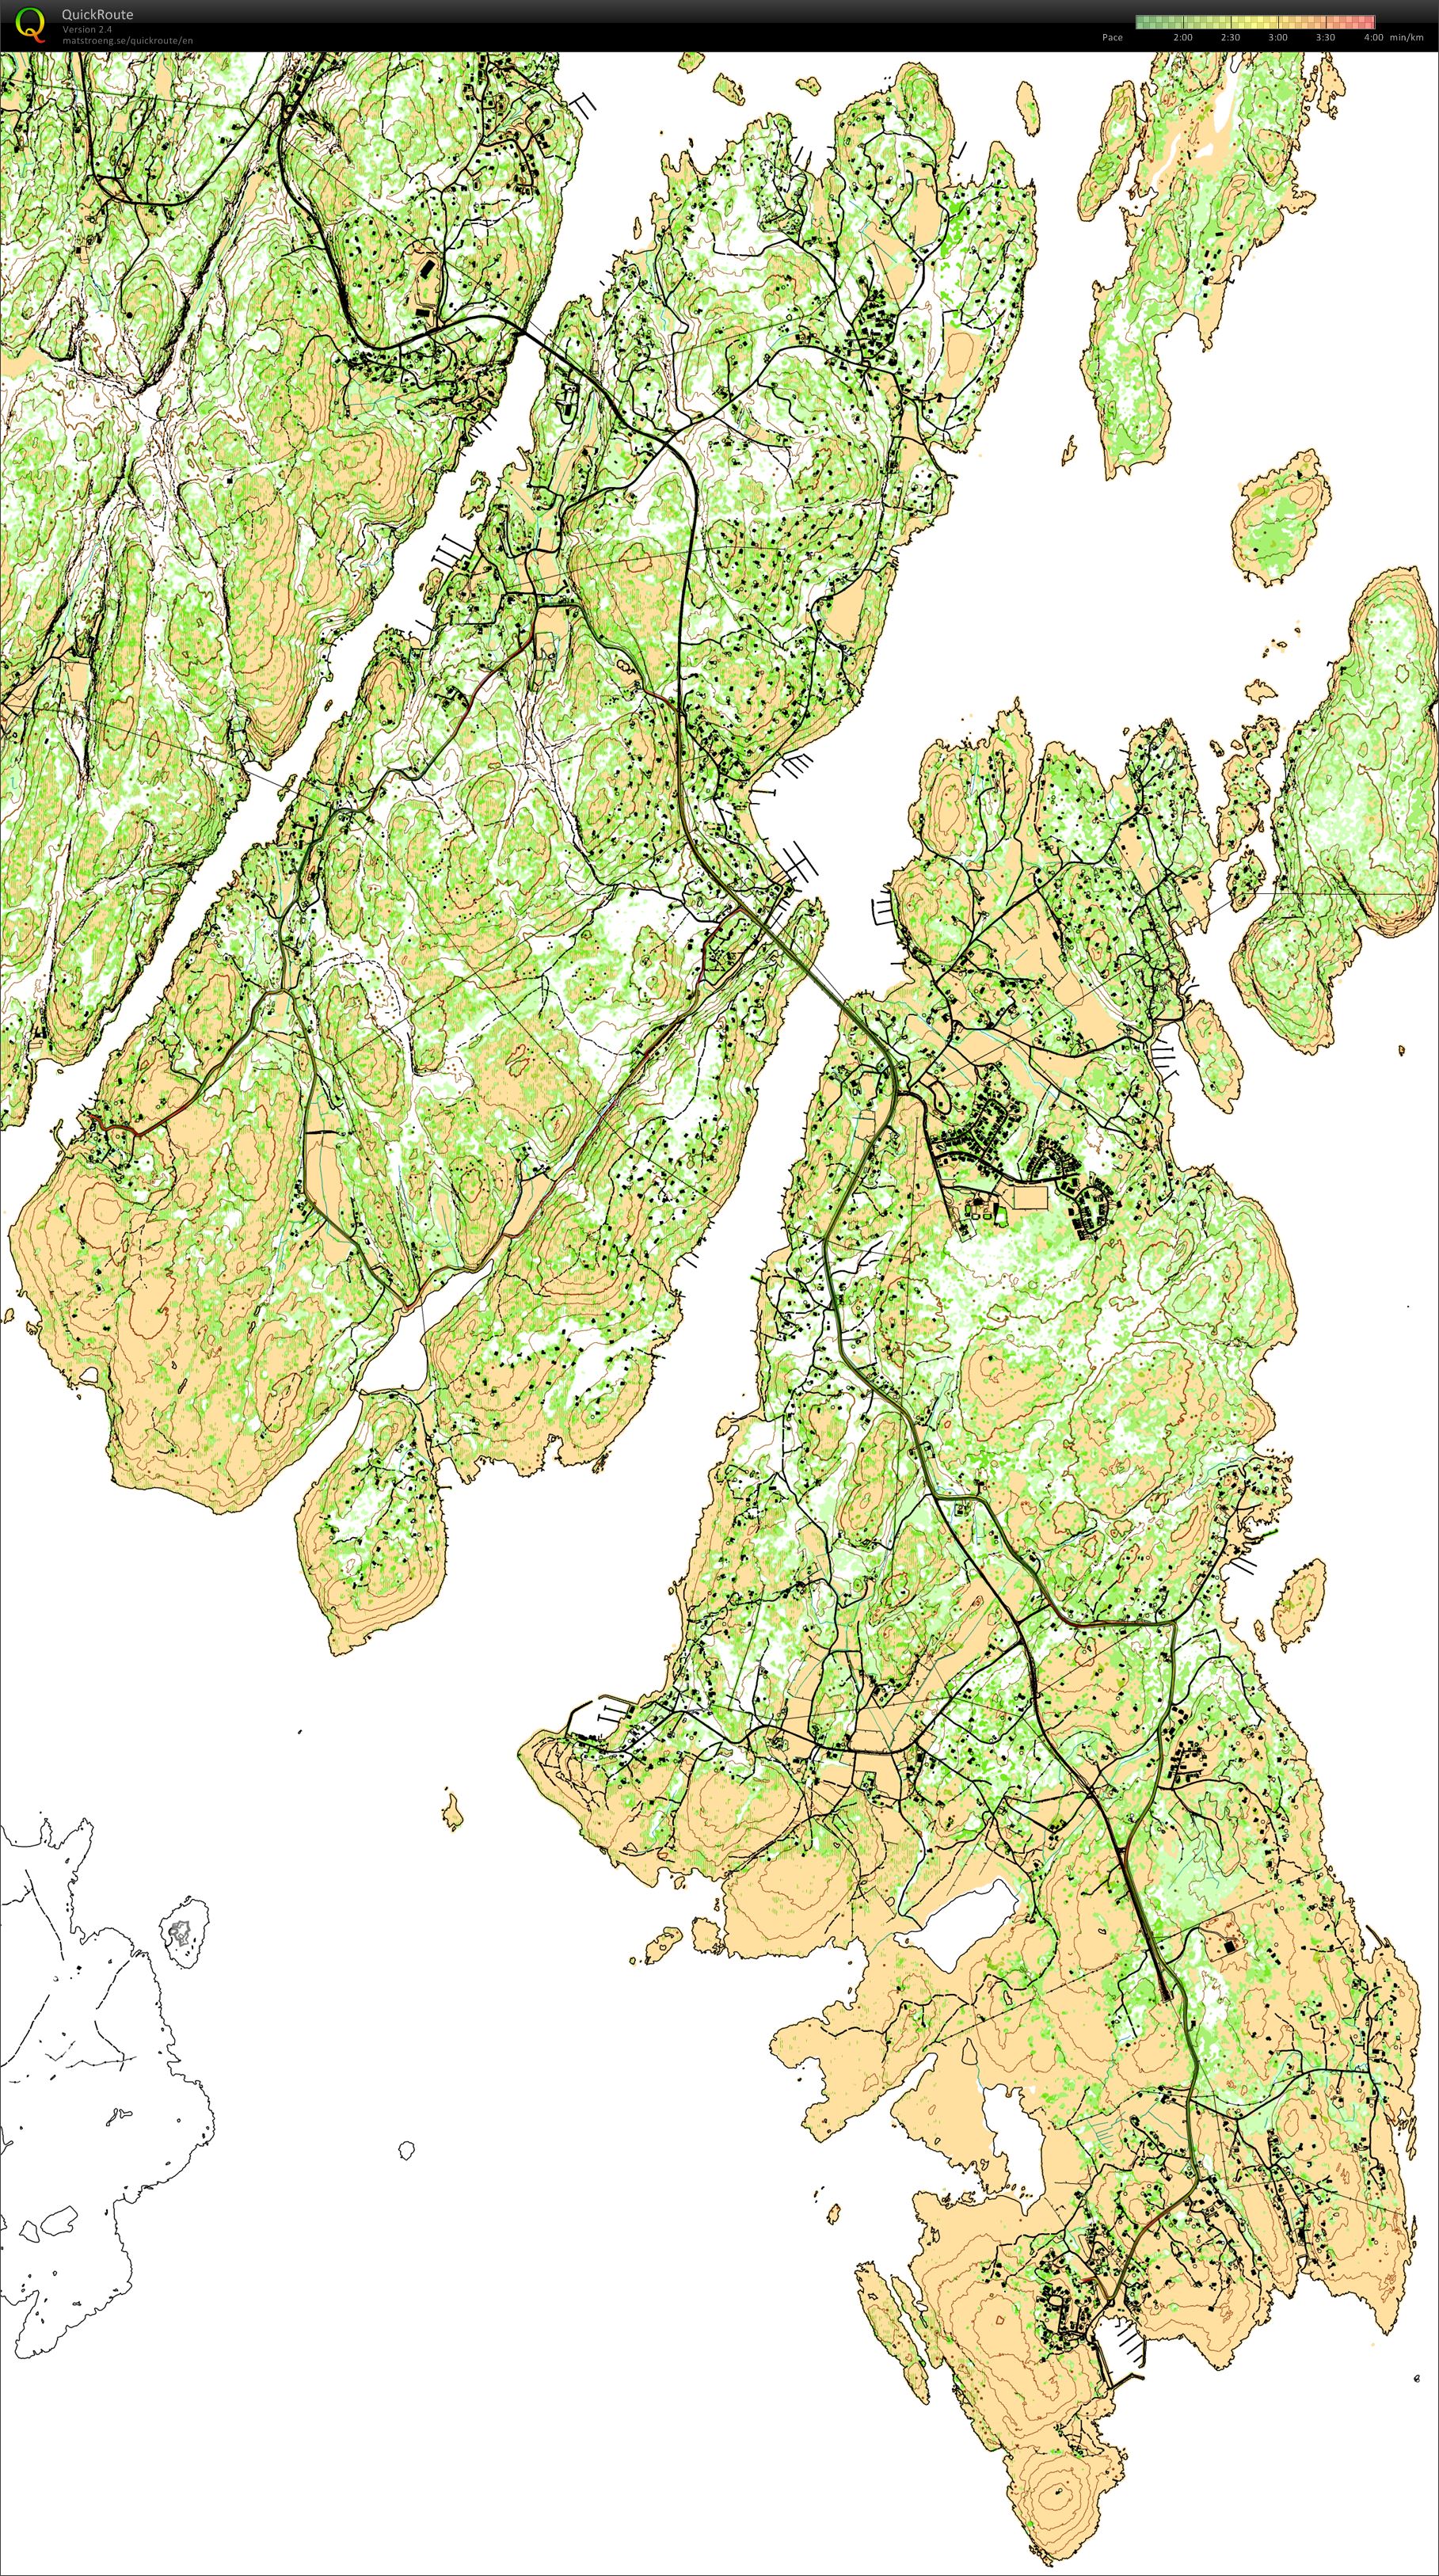 Bike ride on Asmaloy and Spjærøy, using autogenerated map (06.07.2014)